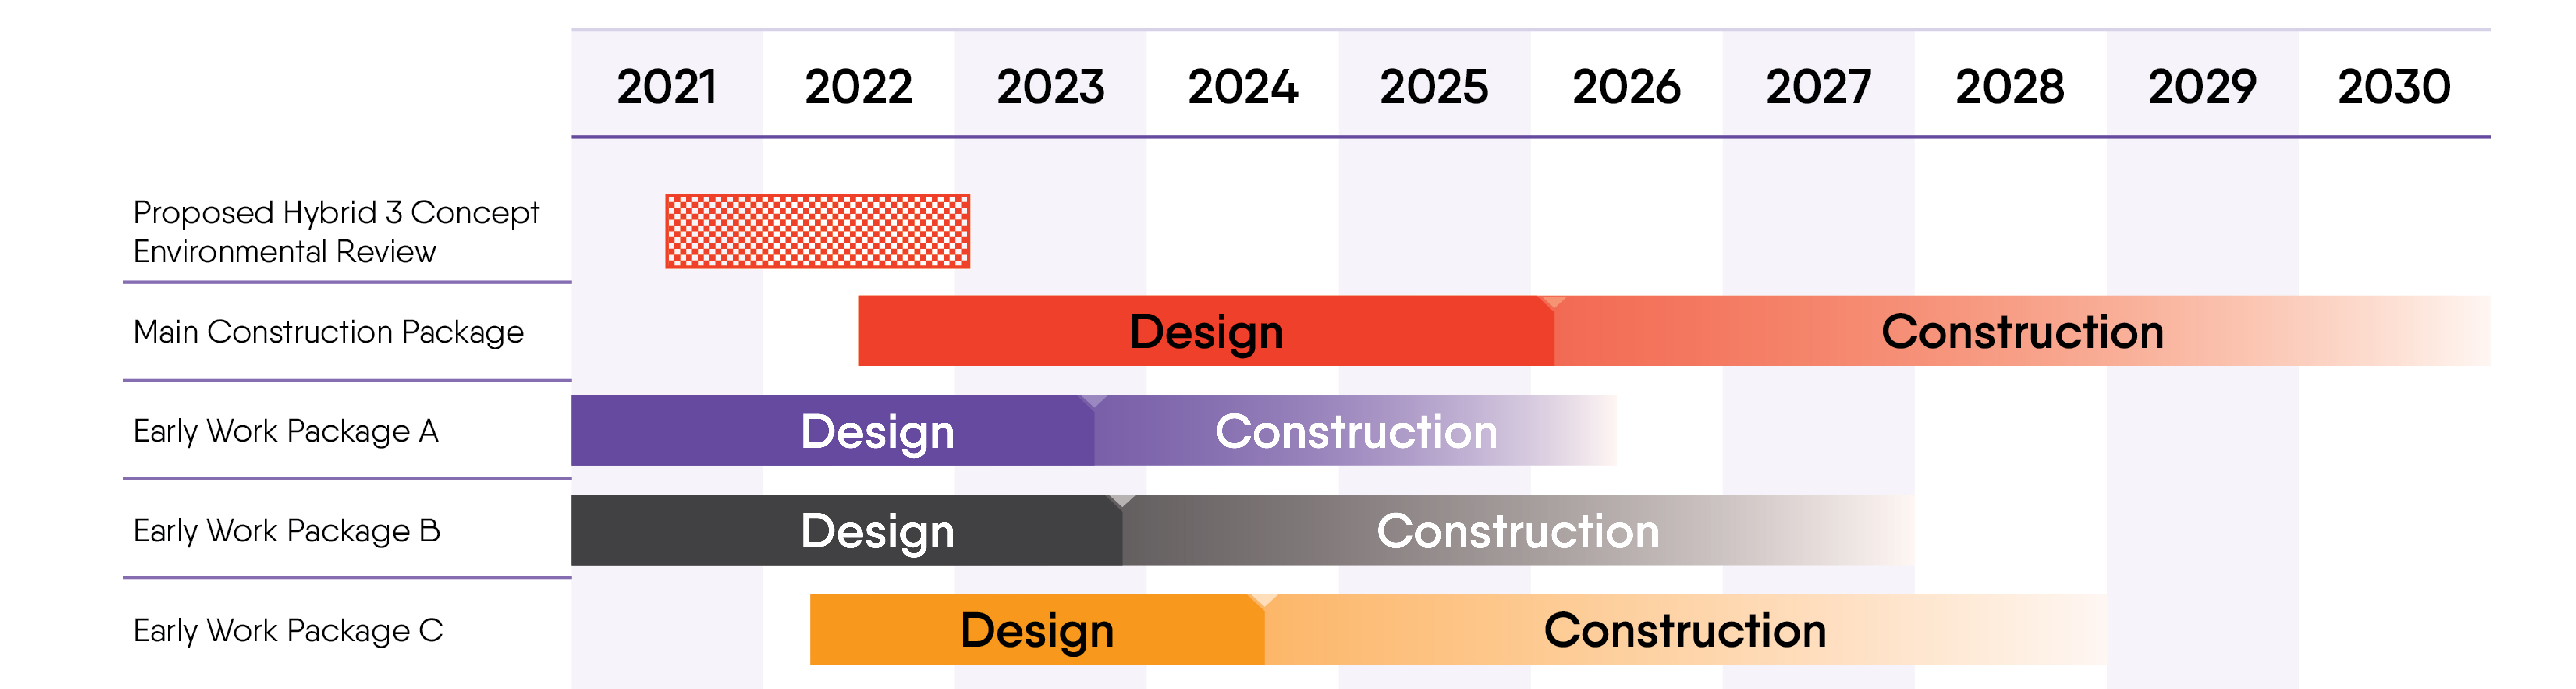 Main construction package design will continue through 2025. Main Construction Package construction is expected to start in 2025 and go through 2029. Early work package a and b design is expected to be completed in 2023 with construction from 2023 to 2026. Early work package c design is expected to be completed in 2024 with construction occurring from 2024 through 2026.